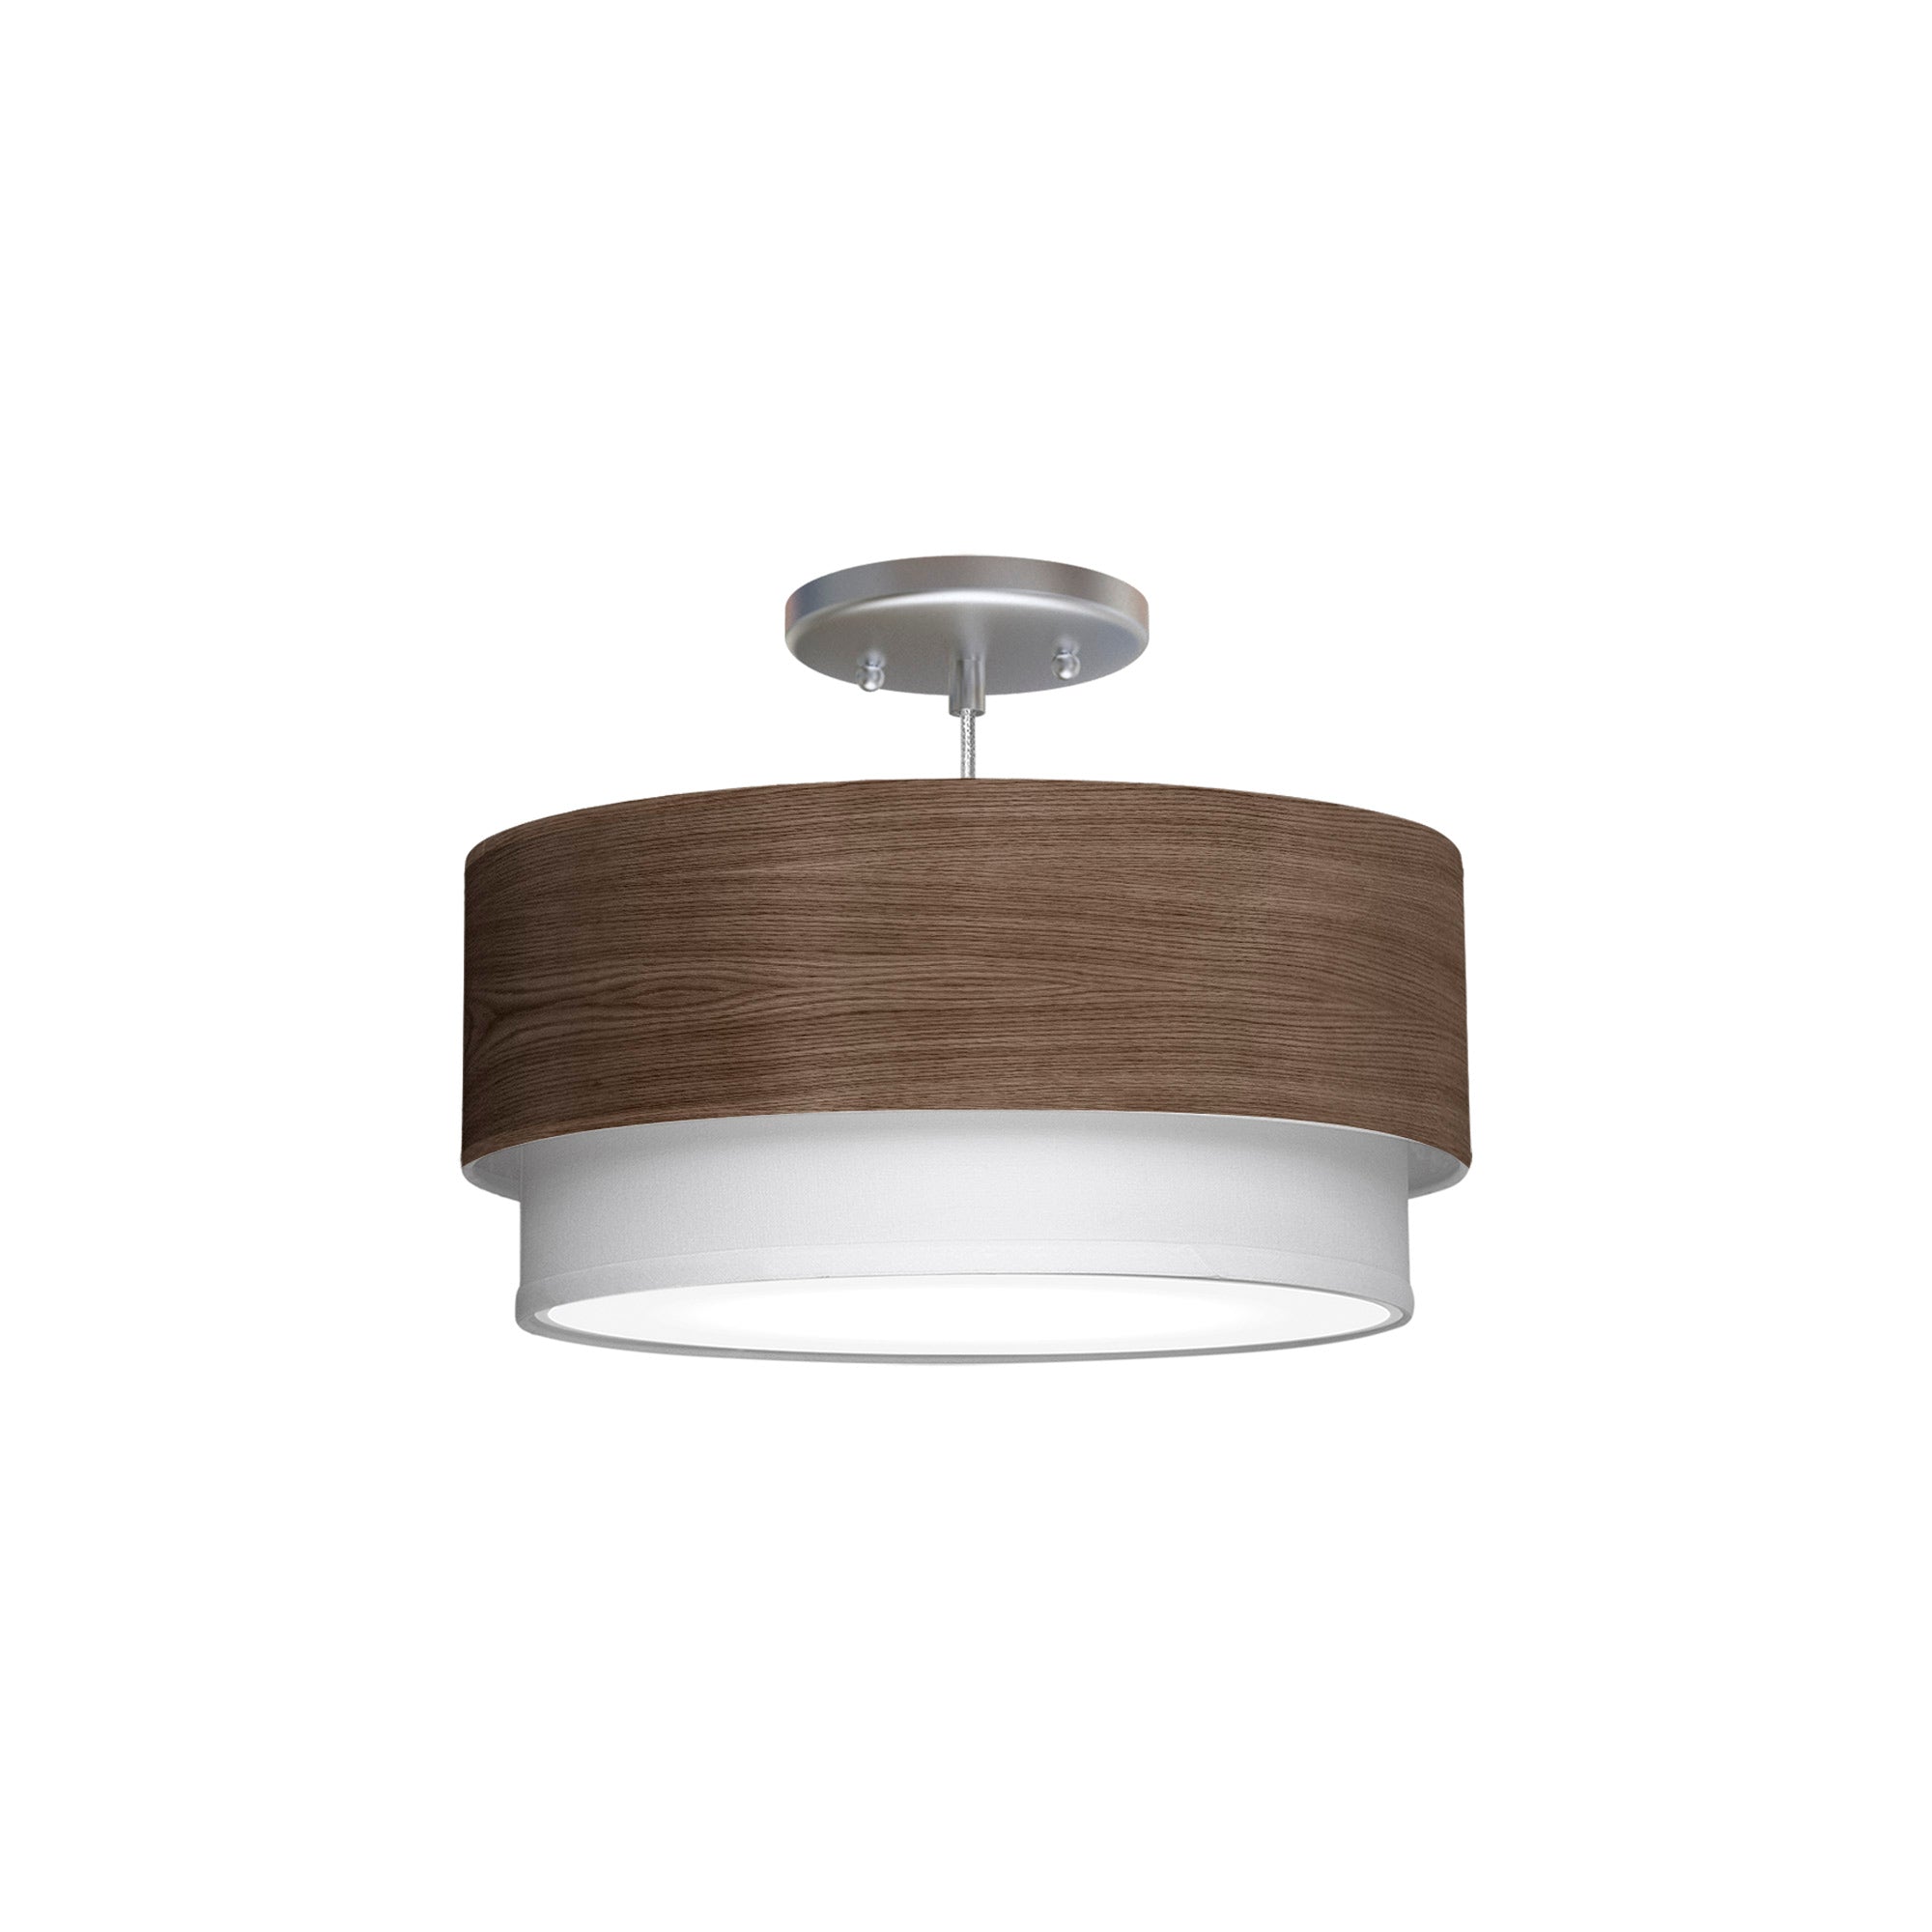 The Lenny Hanging Lamp from Seascape Fixtures with a photo veneer shade in walnut color.